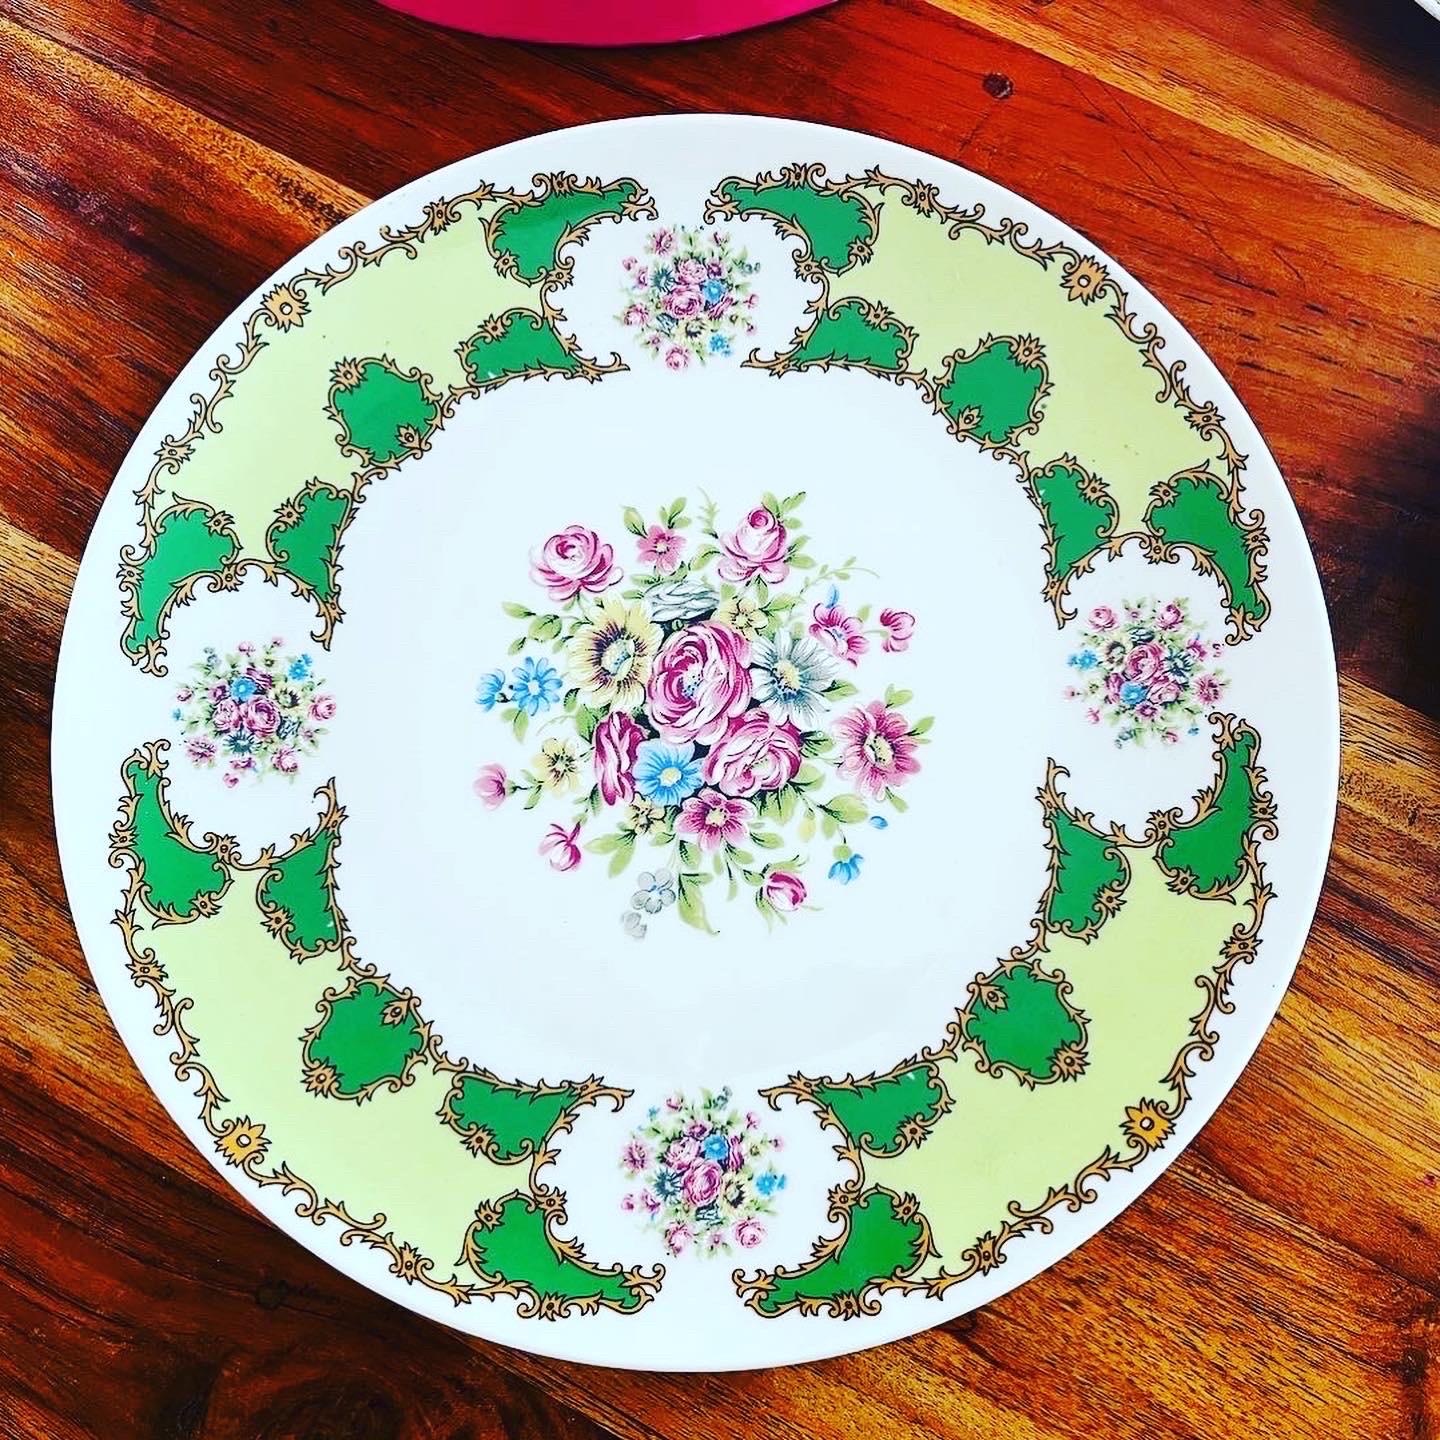 Coordinated Dessert Green Decorated Porcelain '900 -Antiques' In Excellent Condition For Sale In Foggia, FG